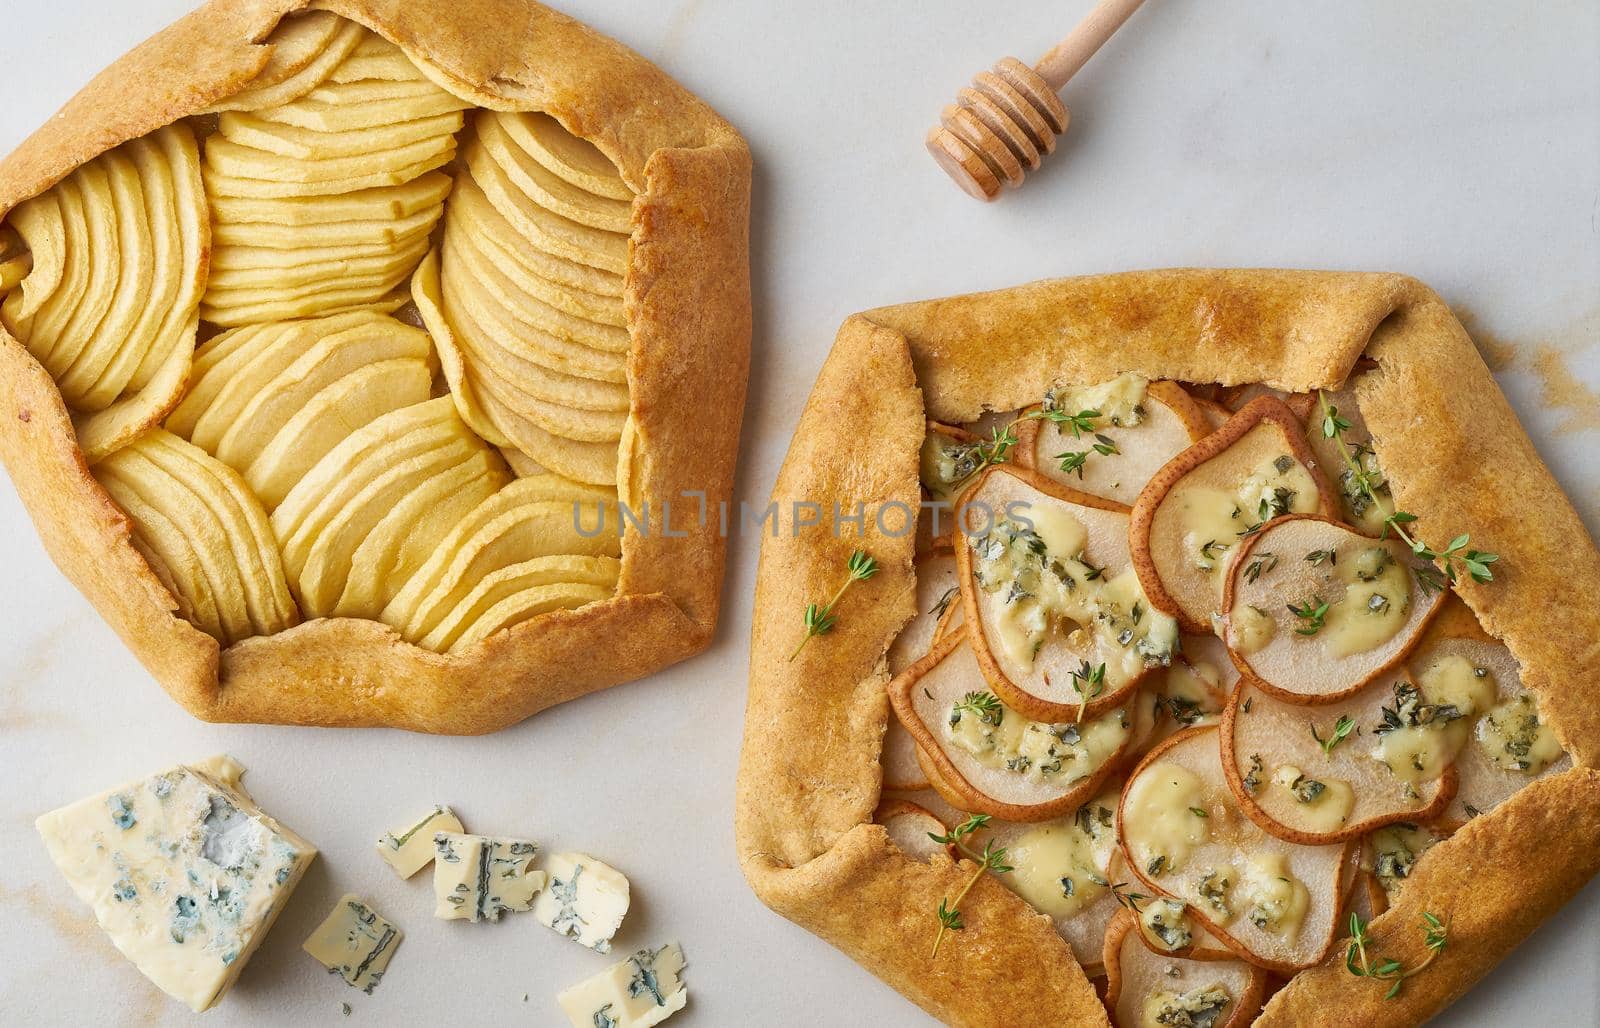 Fruit galette, apple pie with a honey, savory pear and cheese pie, marble table, top view, close up